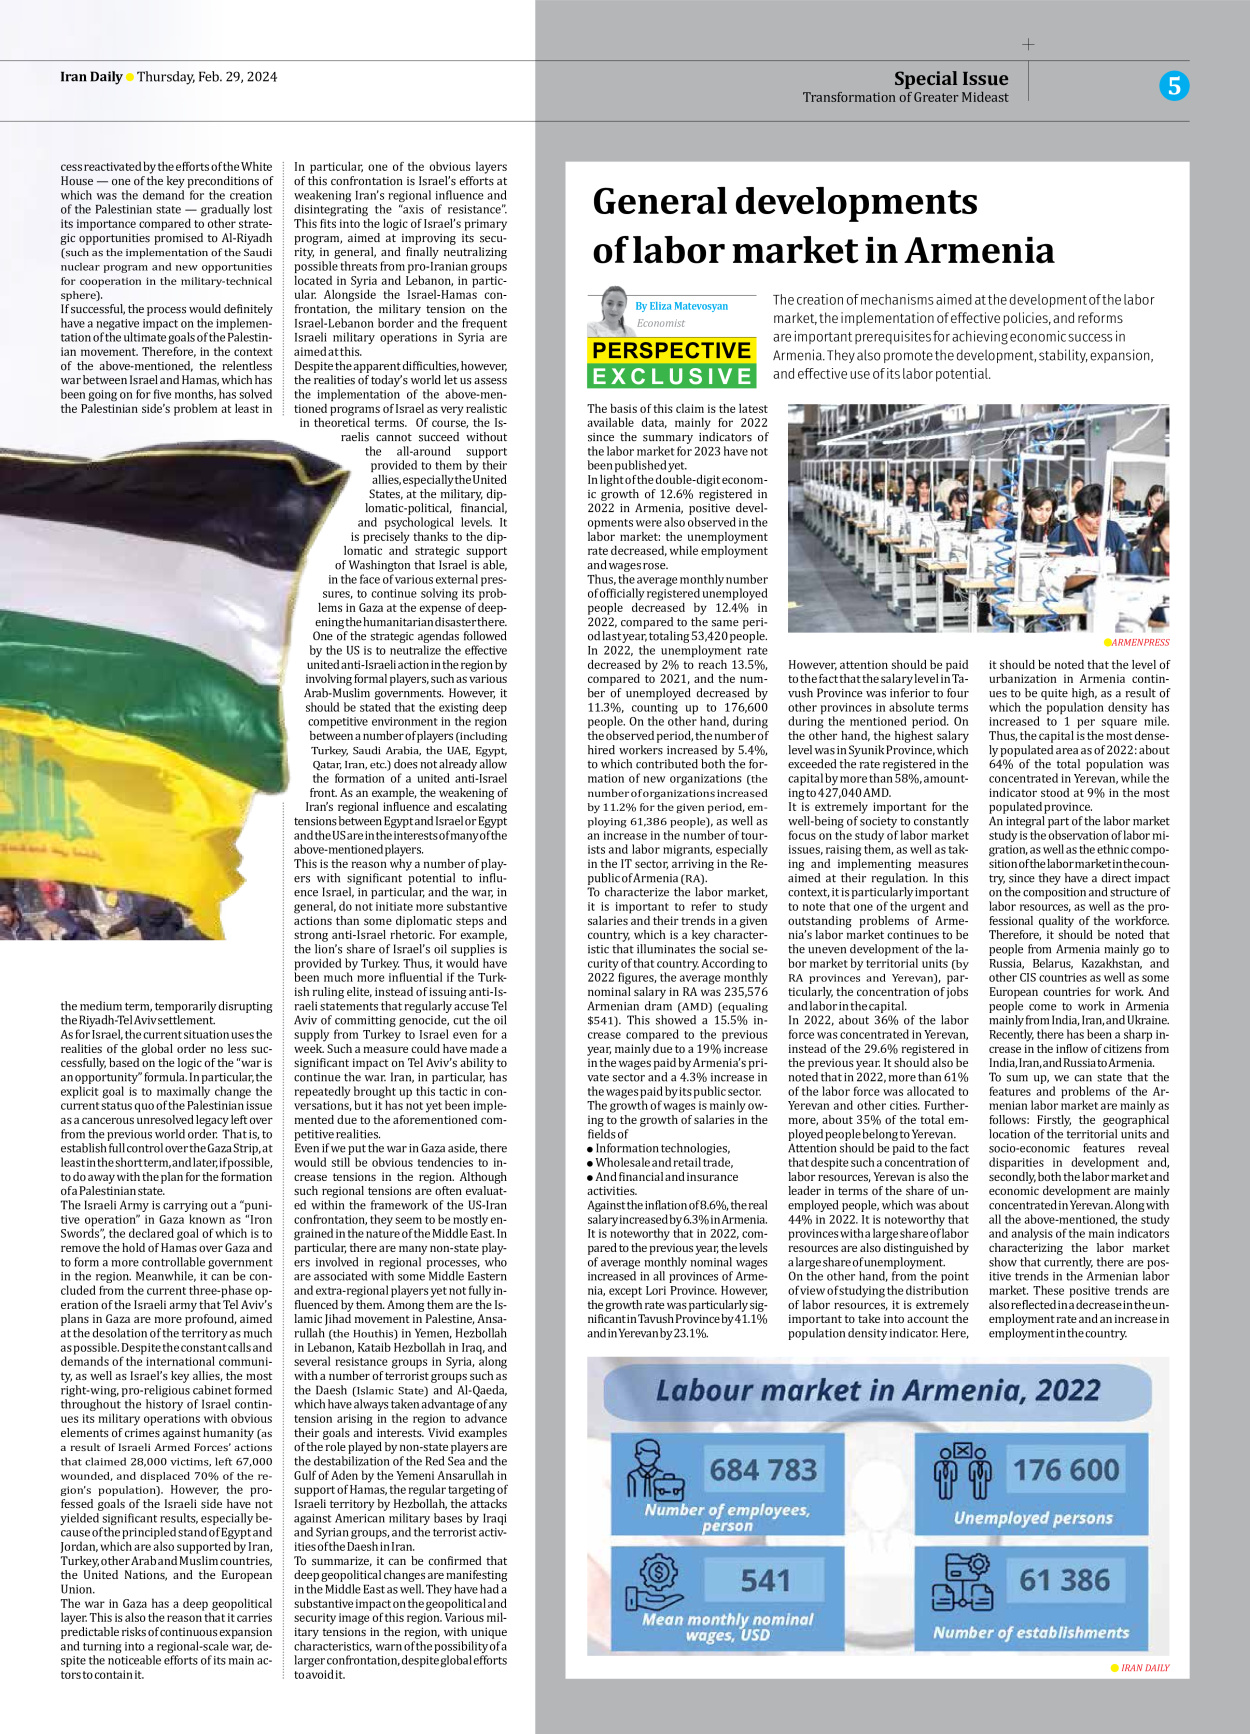 Iran Daily - Number Seven Thousand Five Hundred and Eighteen - 29 February 2024 - Page 5